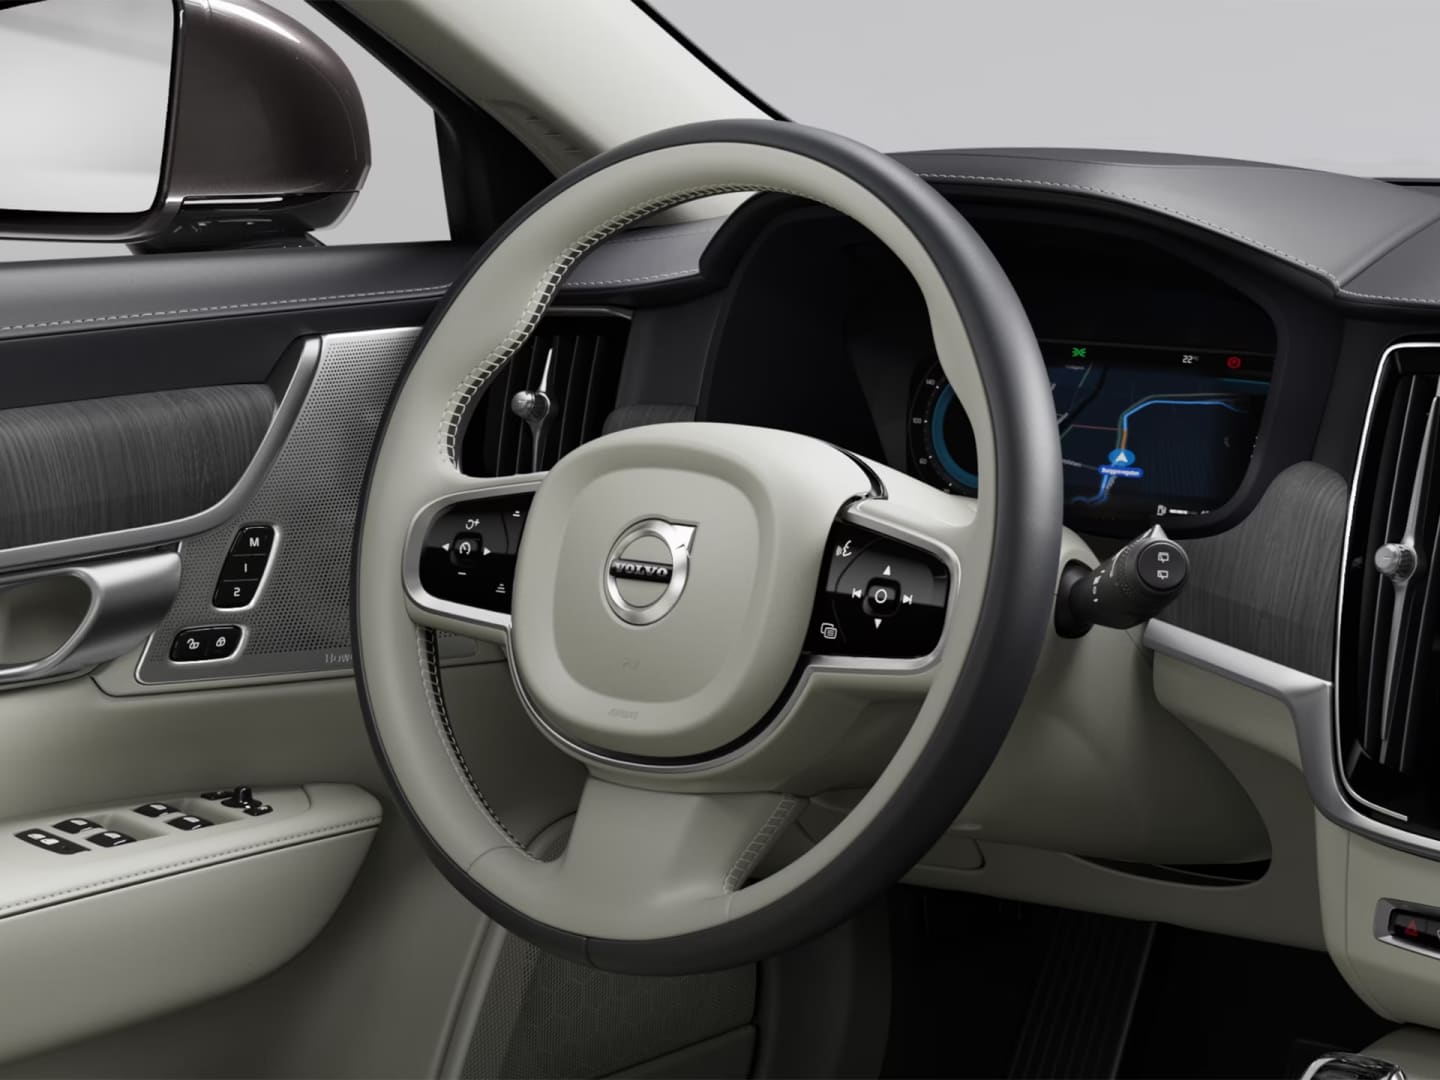 Driver's position and center console in the Volvo S90.